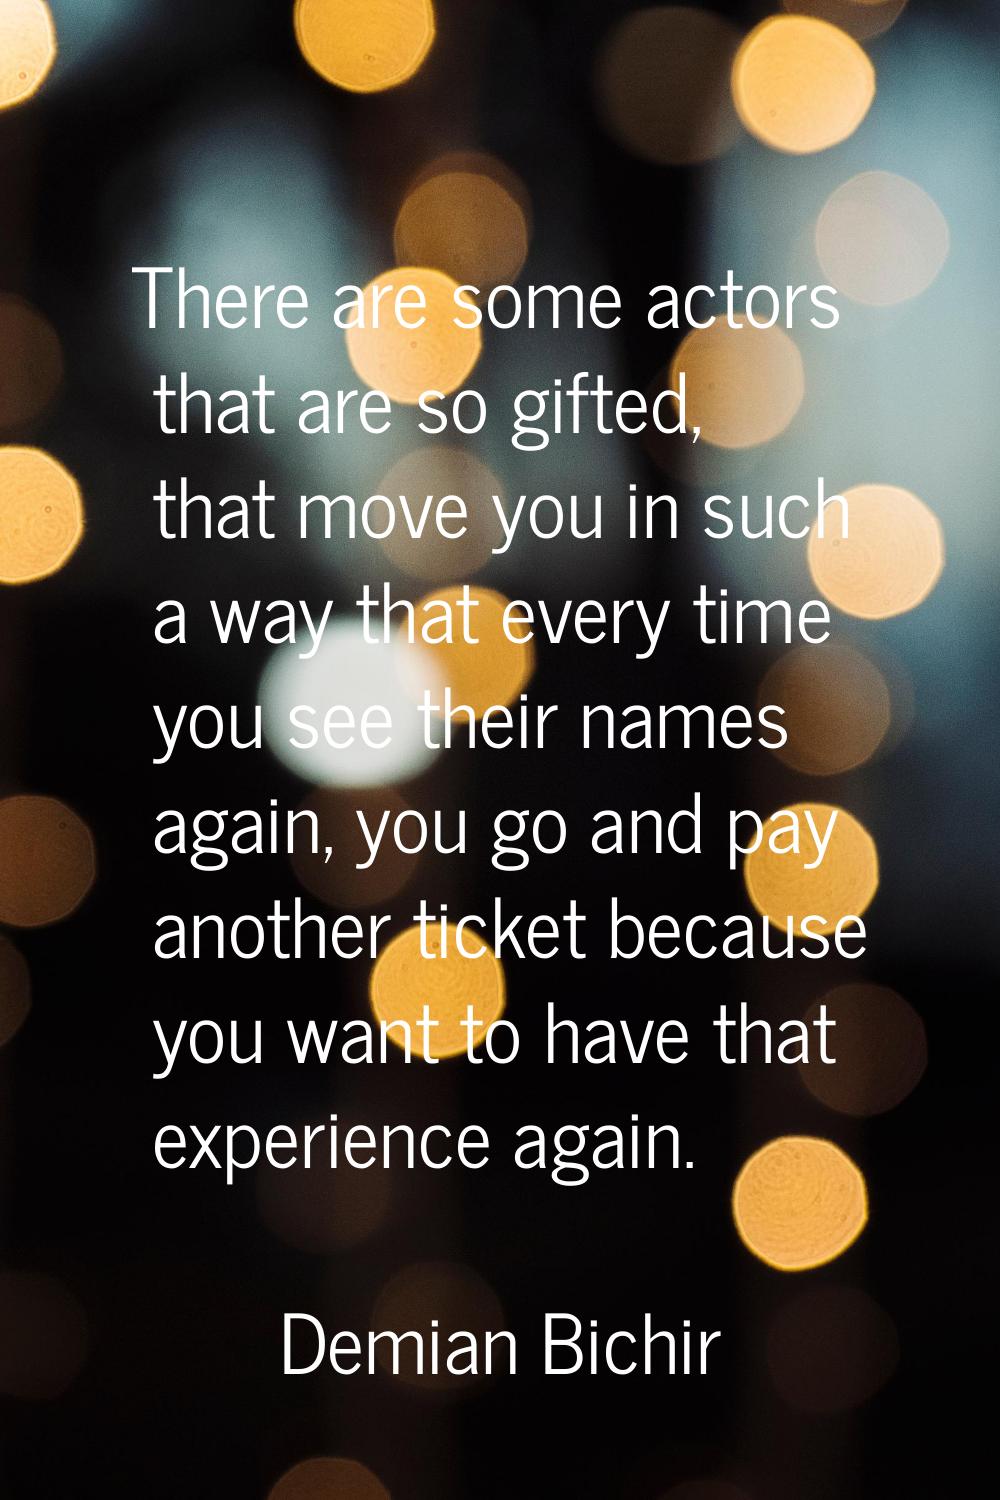 There are some actors that are so gifted, that move you in such a way that every time you see their